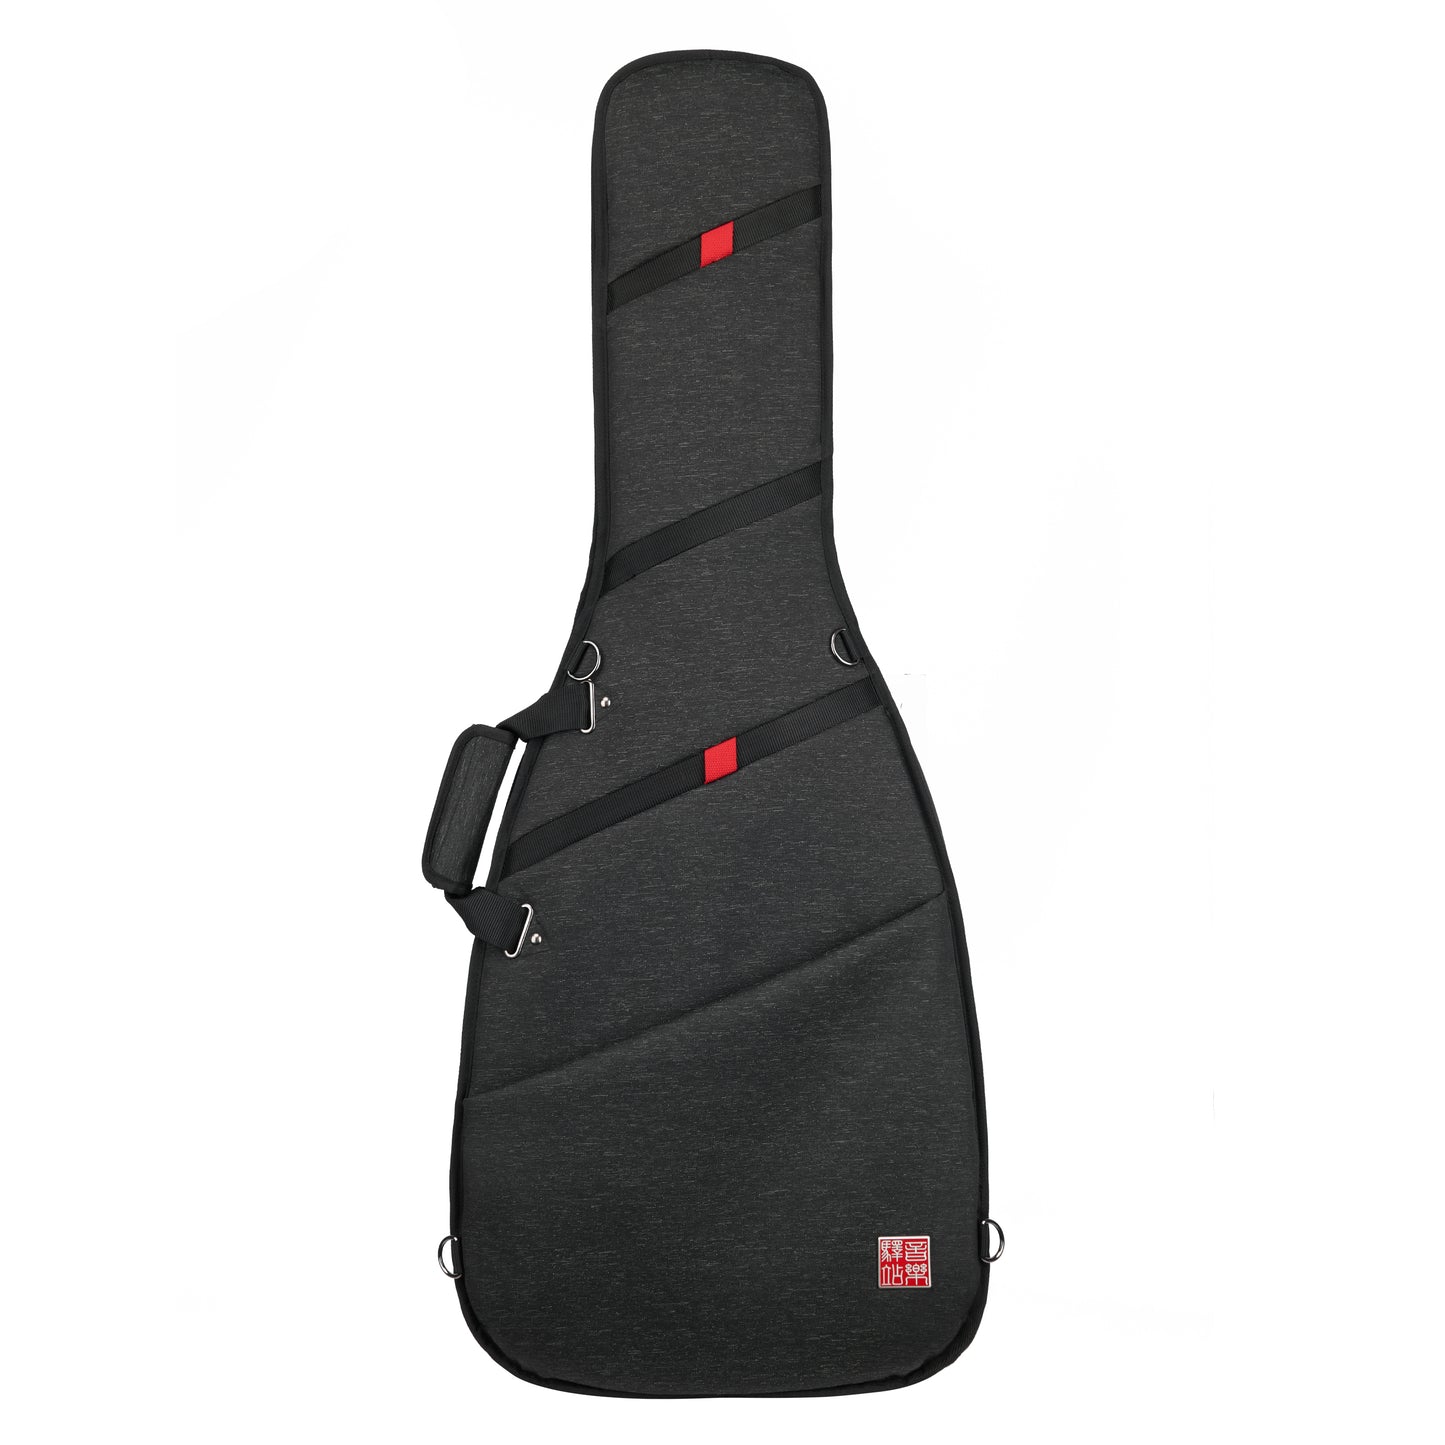 Music Area Electric Guitar Case with Two Detachable Backpacks - RBOEGBLK